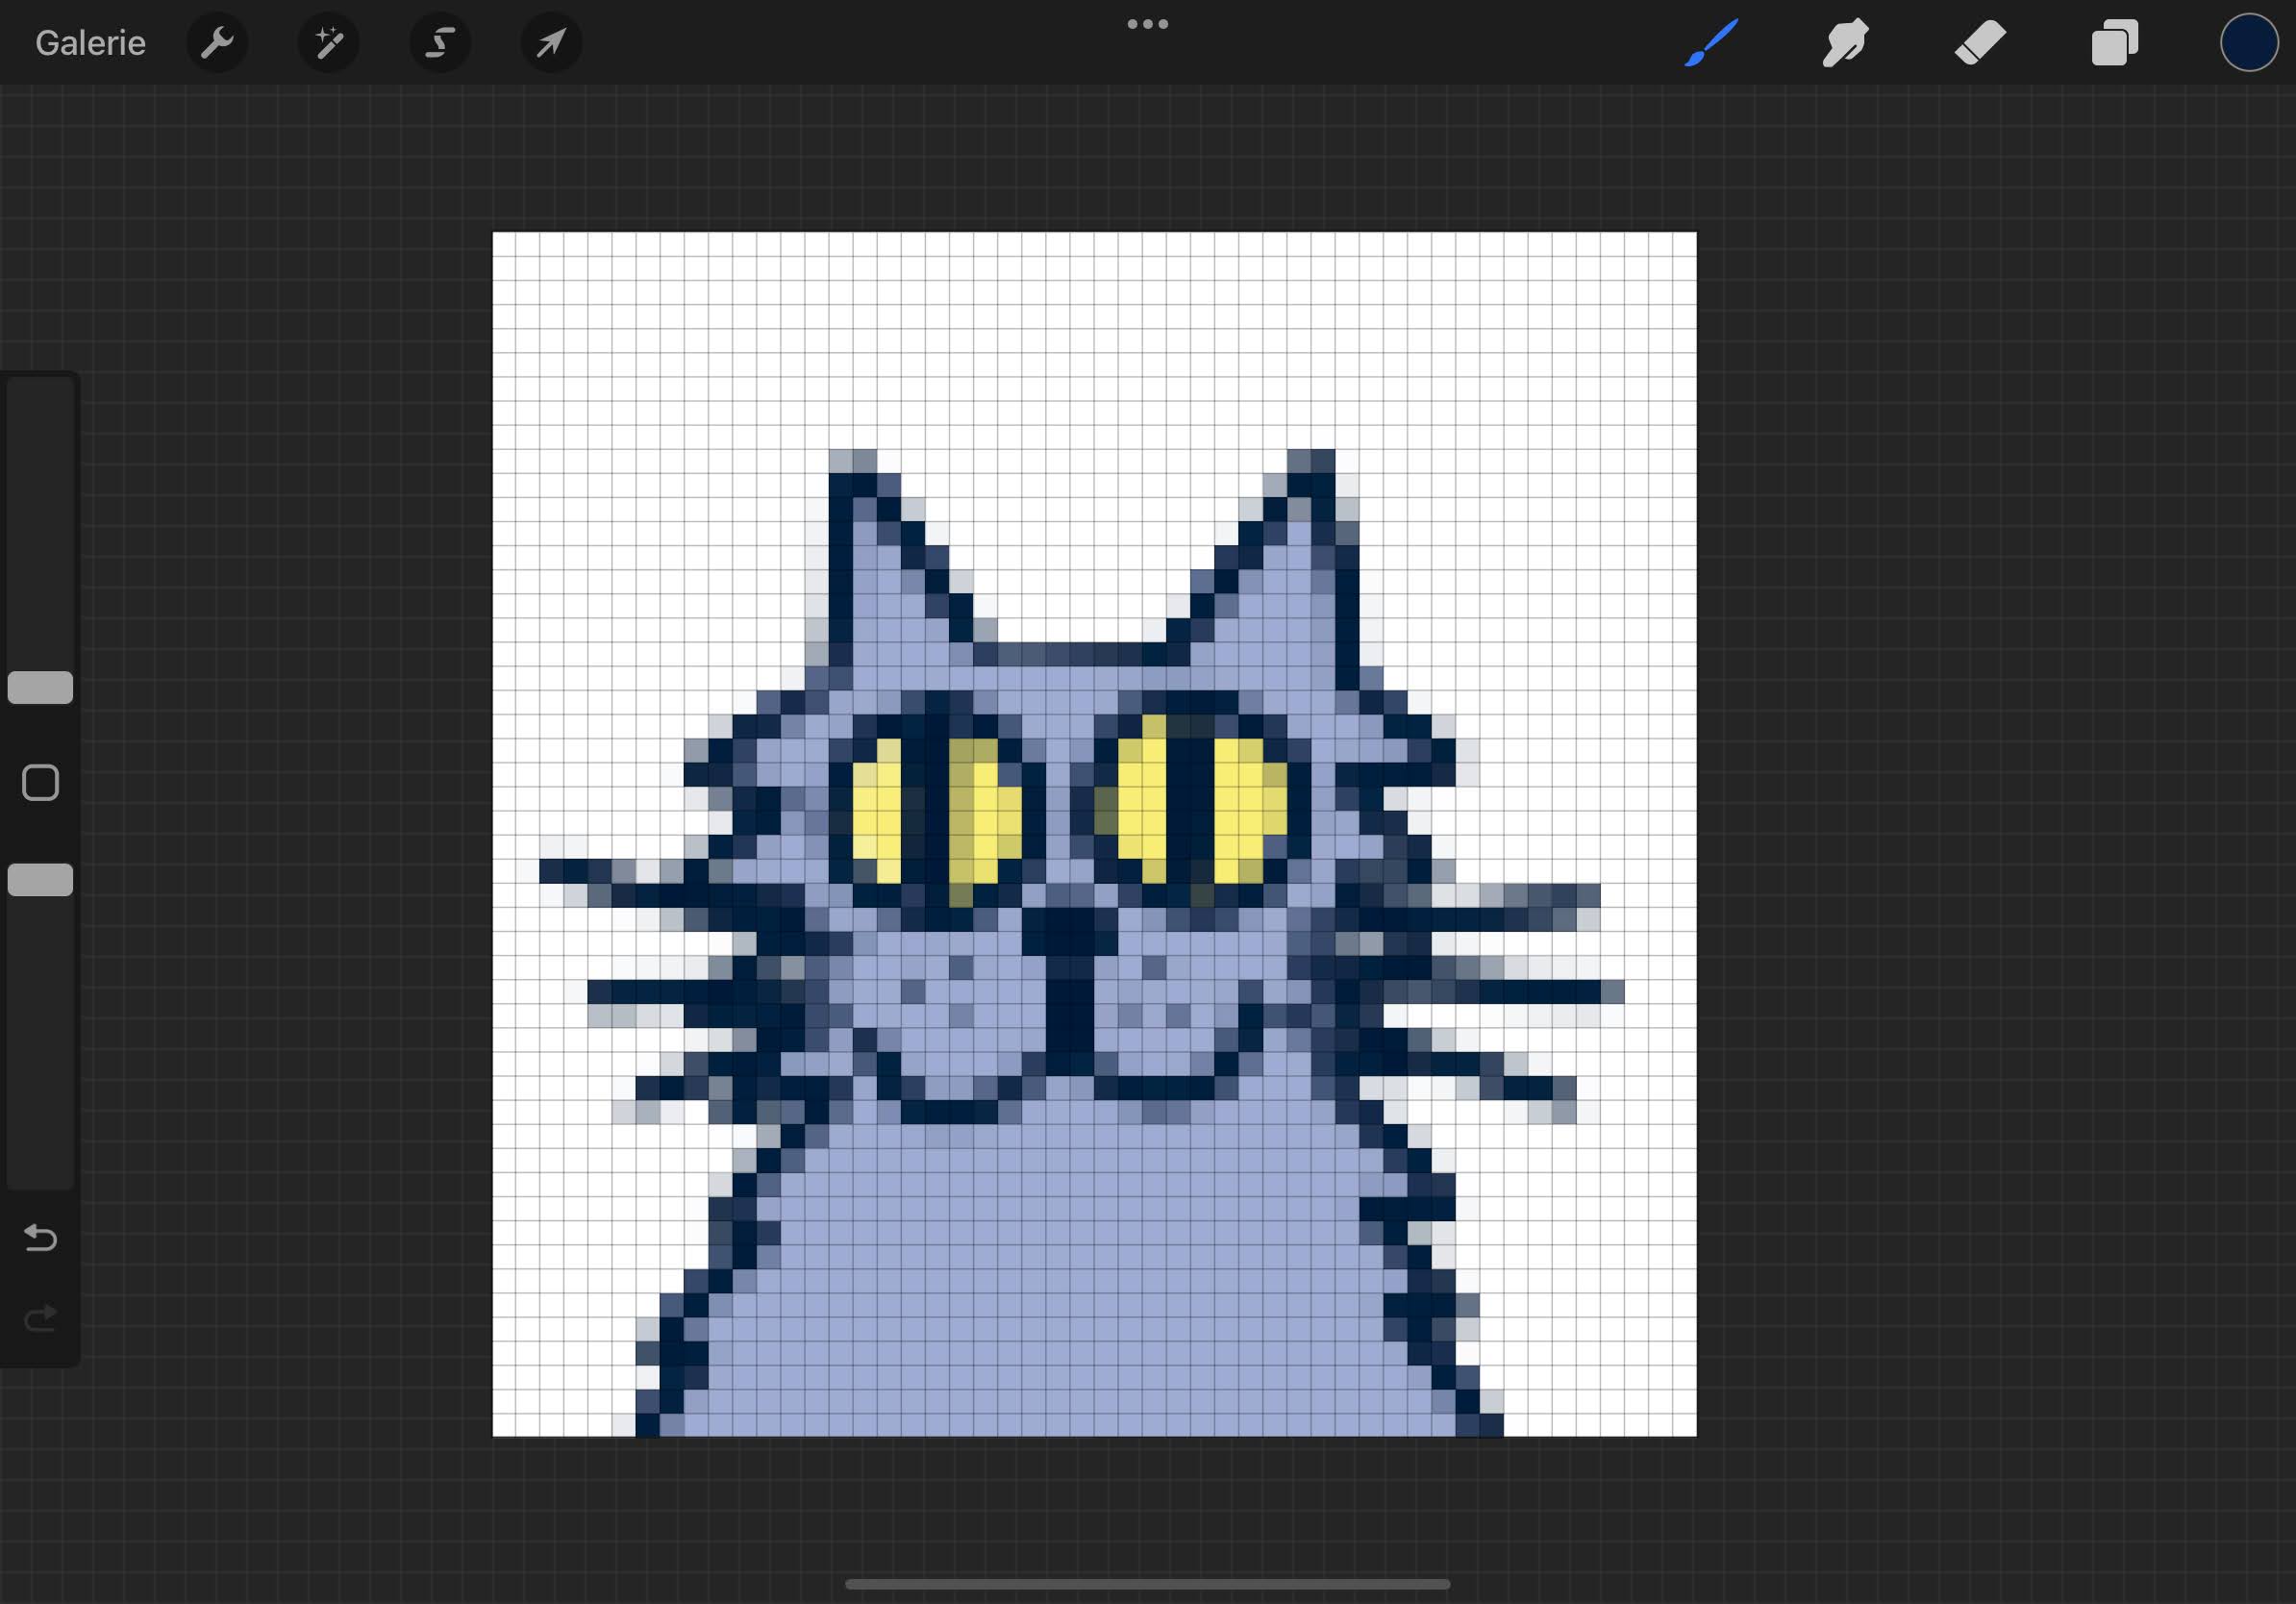 How to make pixel art in Procreate?